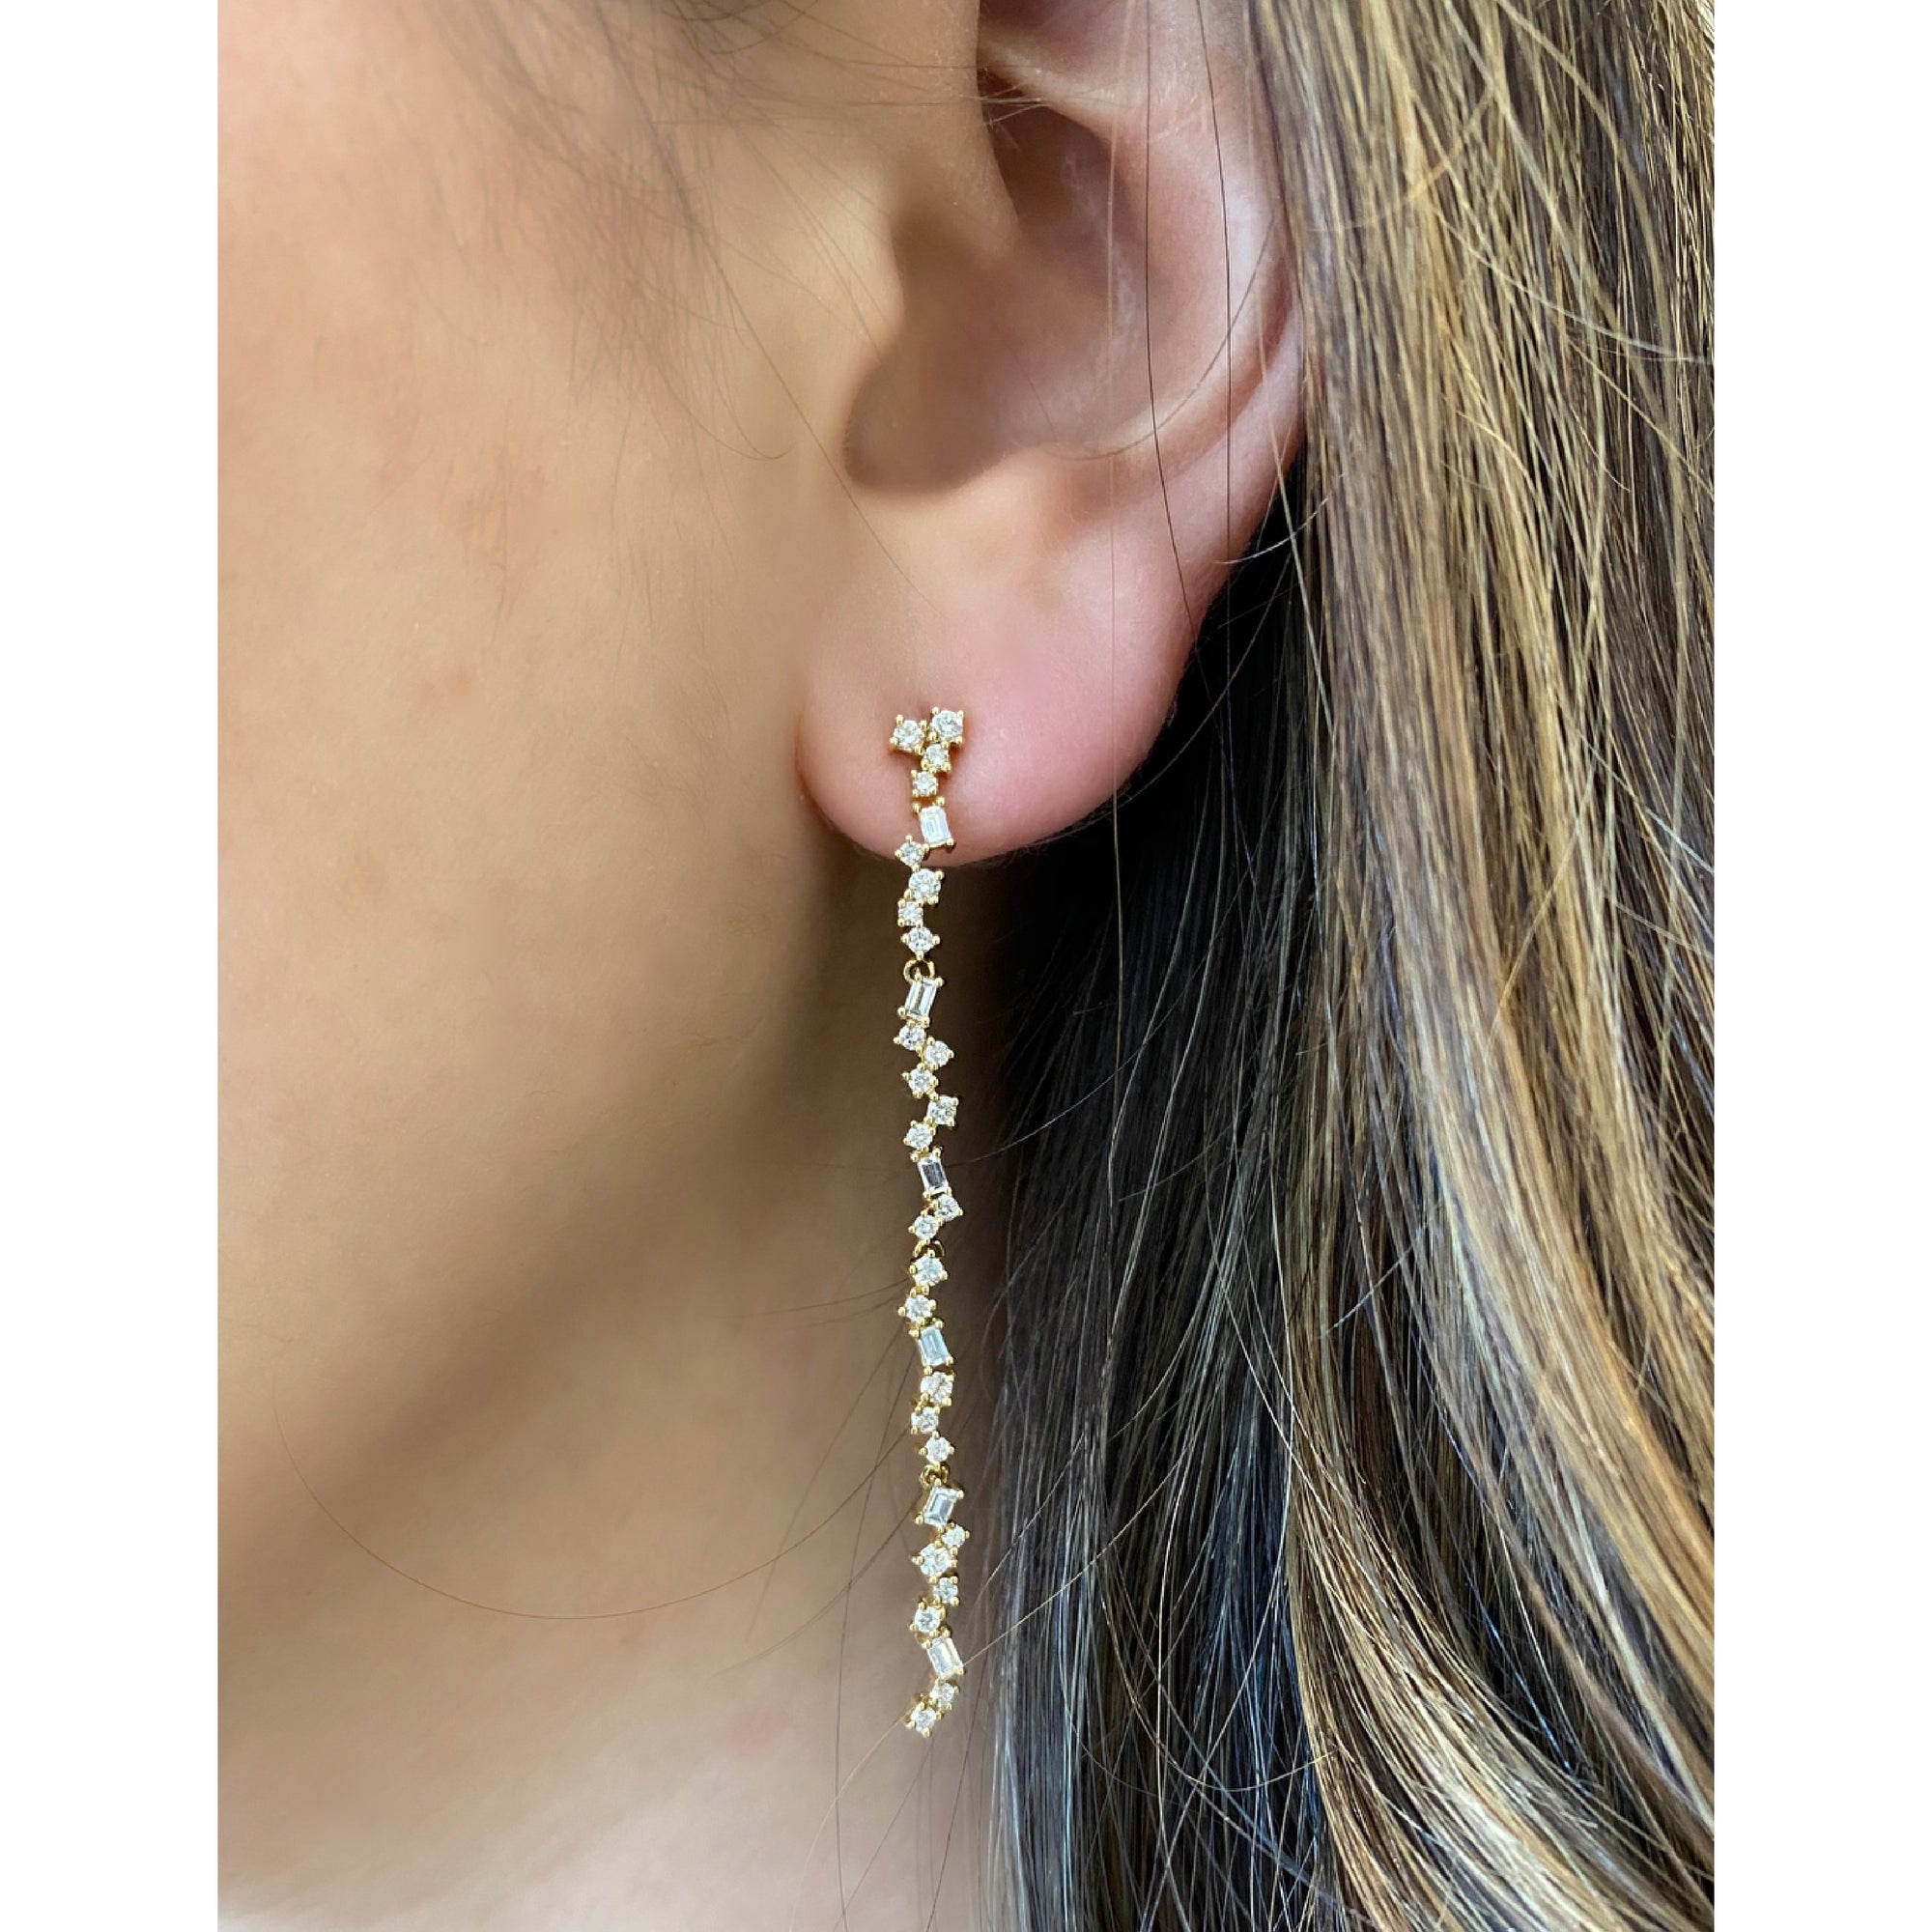 Scattered Diamond Dangle Earrings  -14K gold weighing 3.32 grams  -52 round prong-set diamonds totaling 0.75 carats  -12 prong-set straight baguettes totaling 0.31 carats.